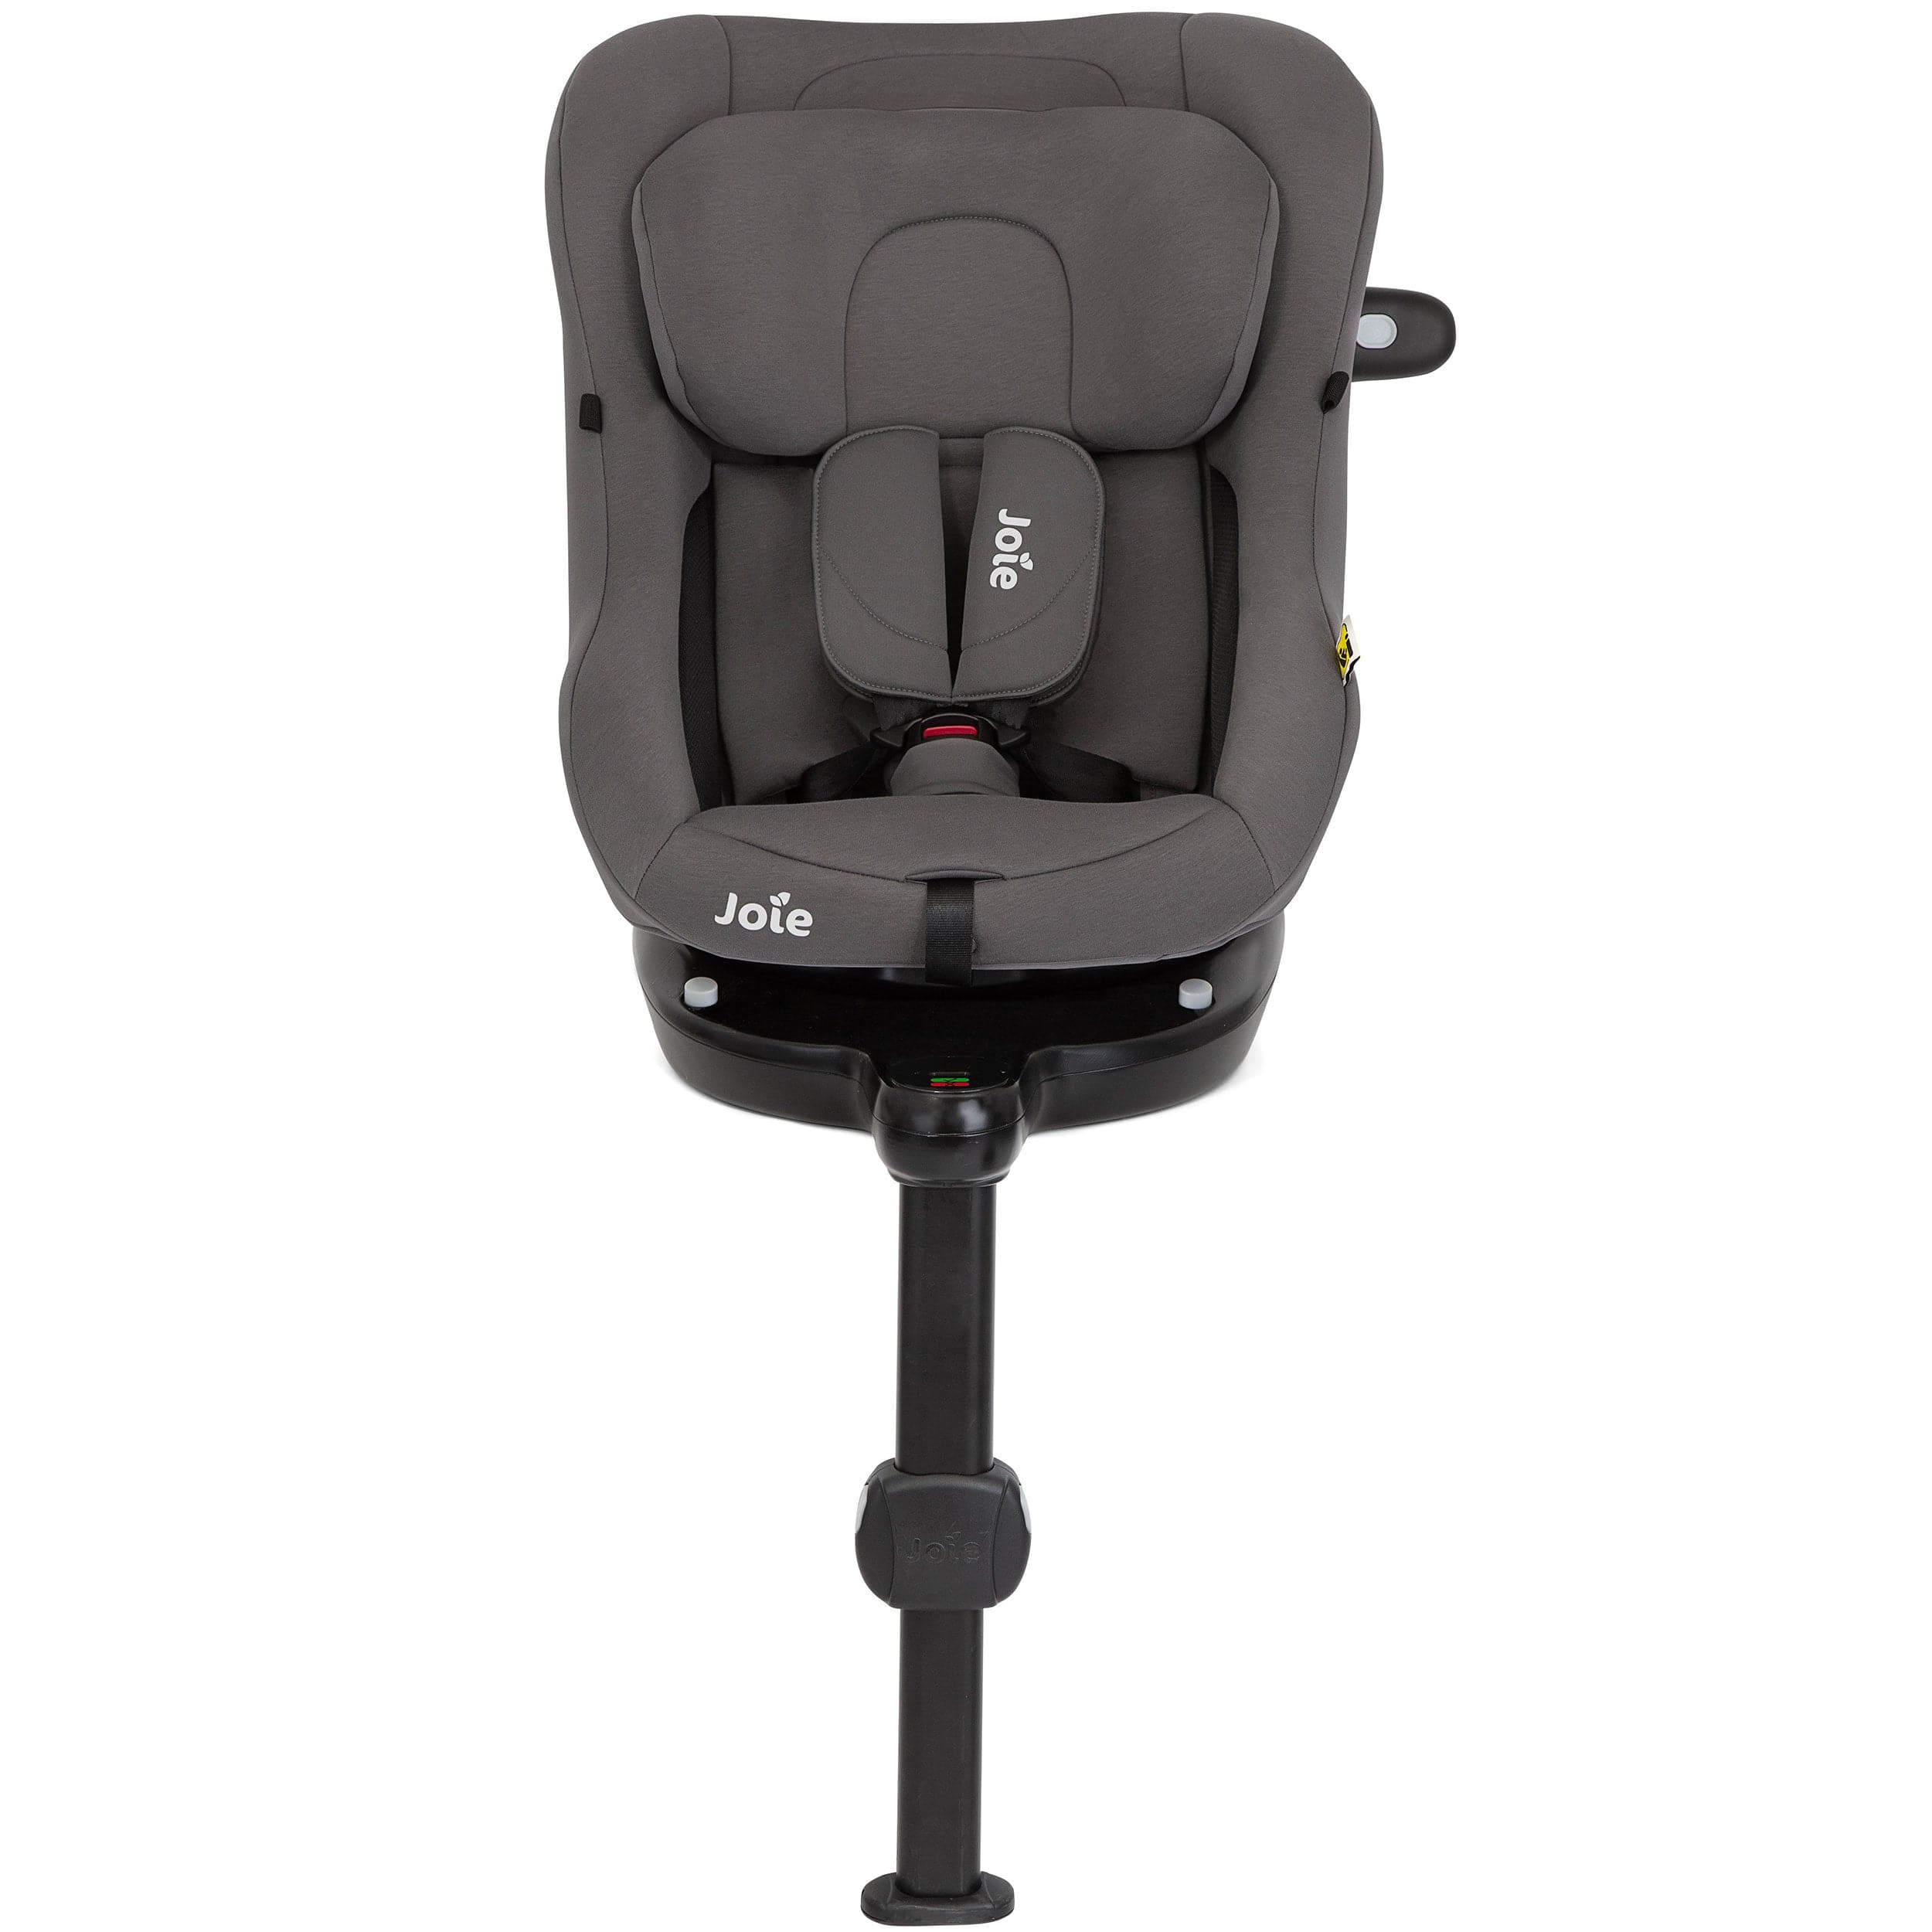 Joie forward facing car seats Joie i-Pivot Car Seat in Thunder C2302AATHD000